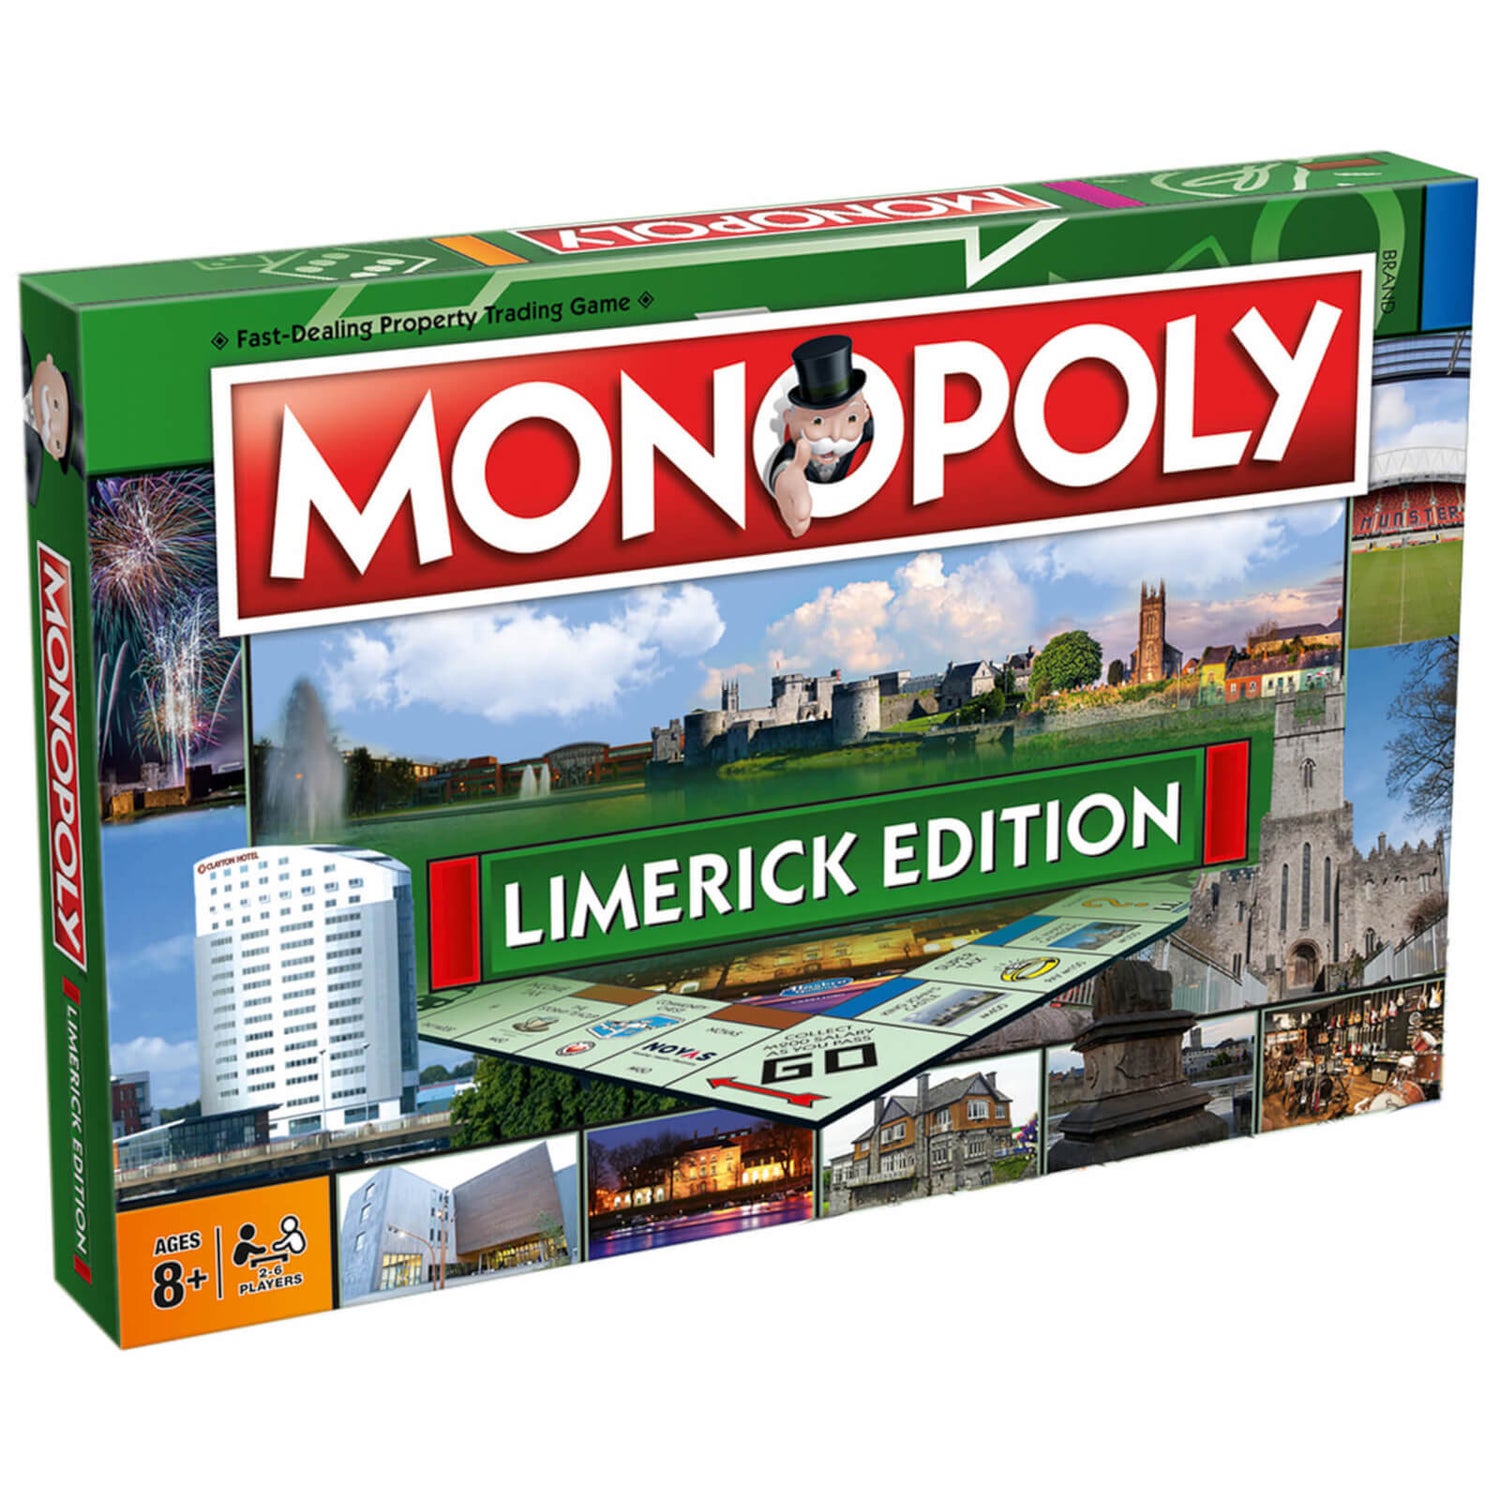 Monopoly Board Game - Limerick Edition